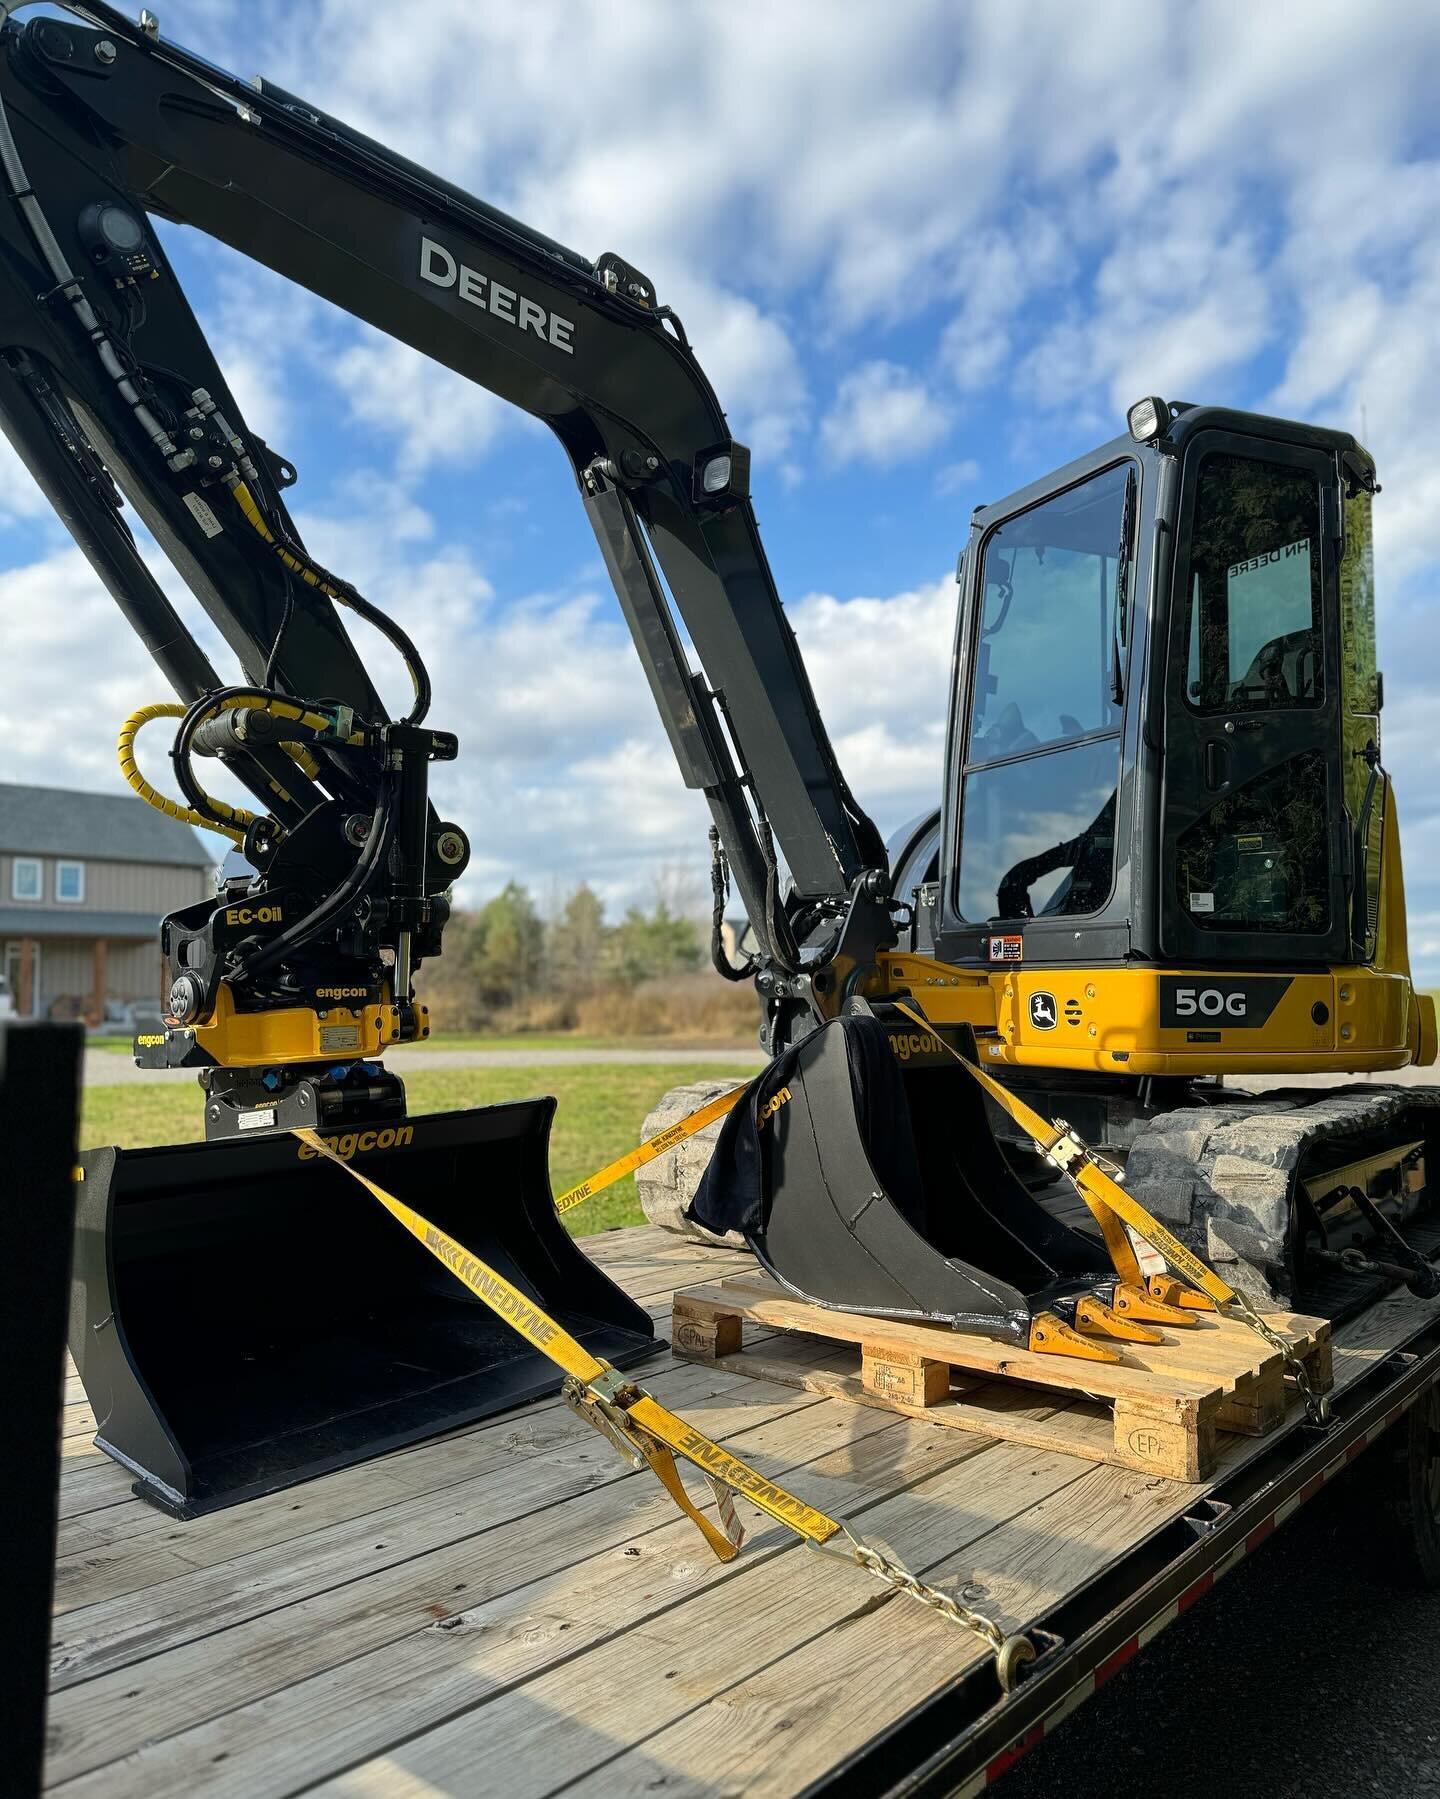 Super excited to welcome our new addition. @engcon_group @engcon_canada 
Thank you Jeremy for an awesome install Job. Done @premierequip1 
.
.
.
#construction #excavator #johndeere #holedigger #heavyequipment #excavators #excavatorlife #excavatoroper